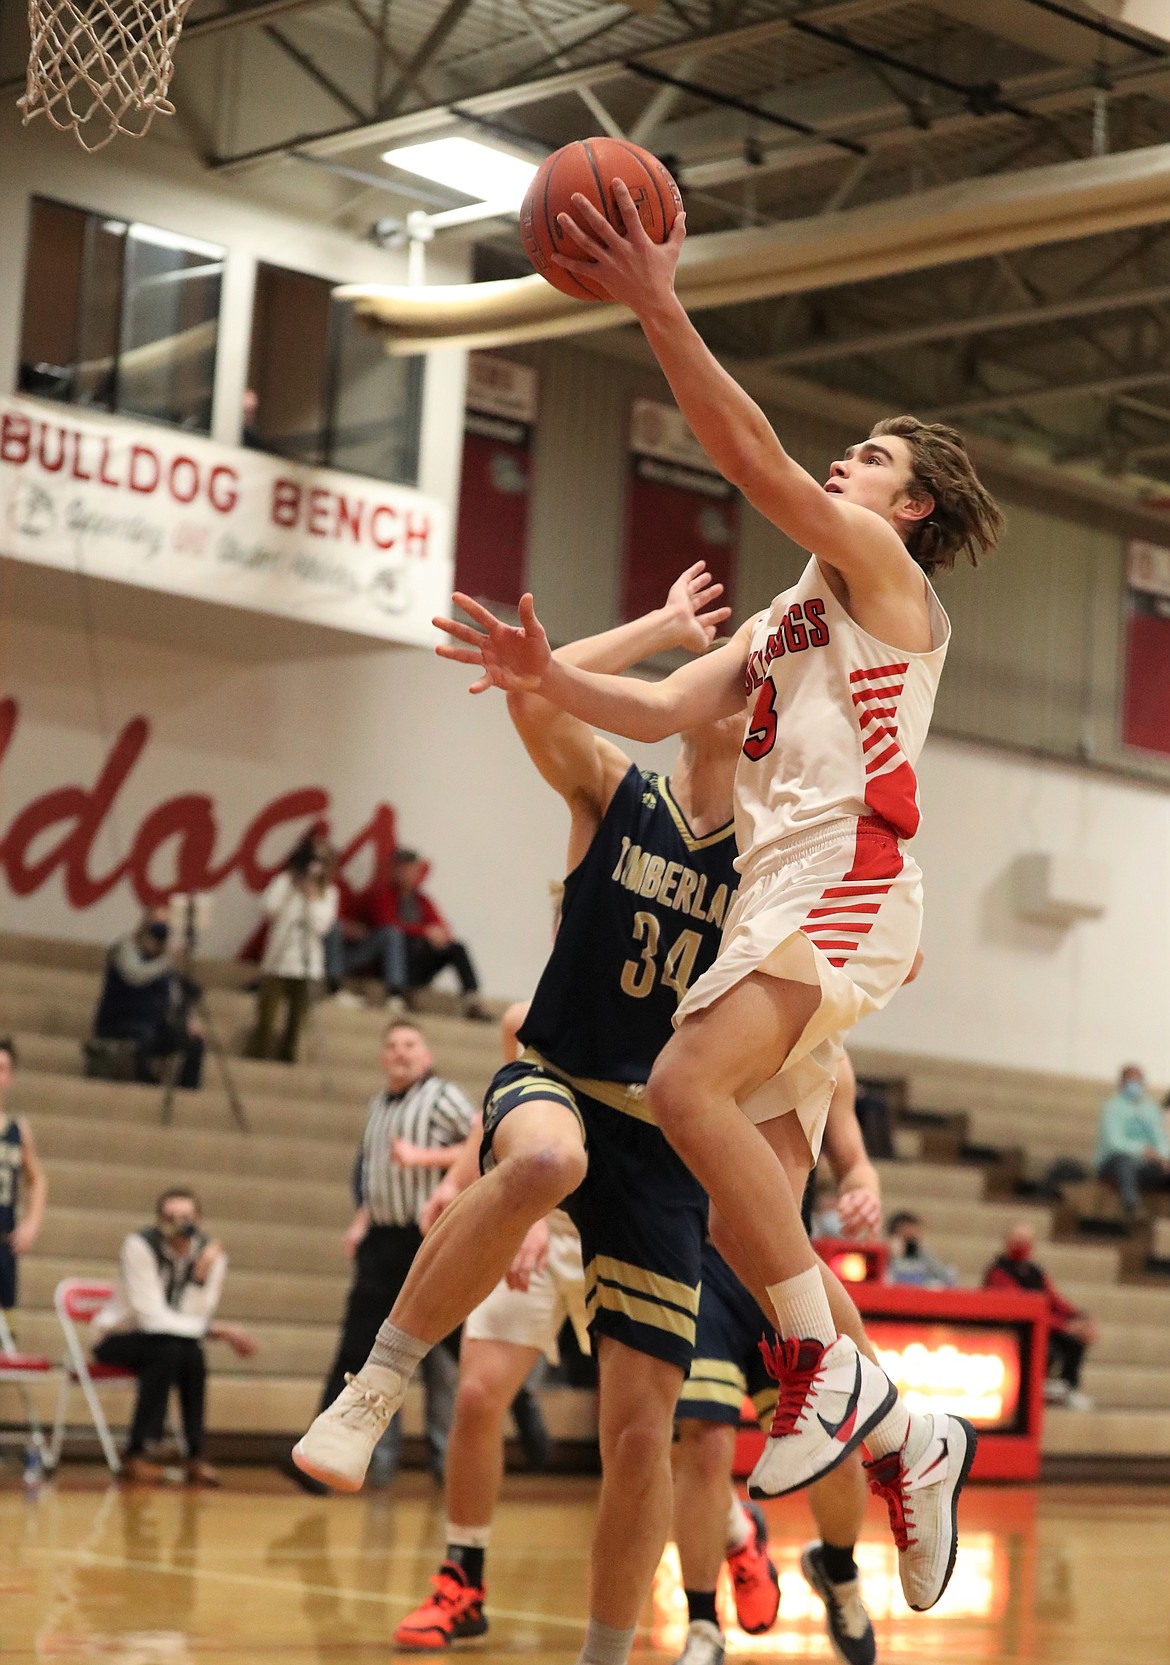 Freshman Max Frank attacks the basket and converts a layup during Thursday's game.